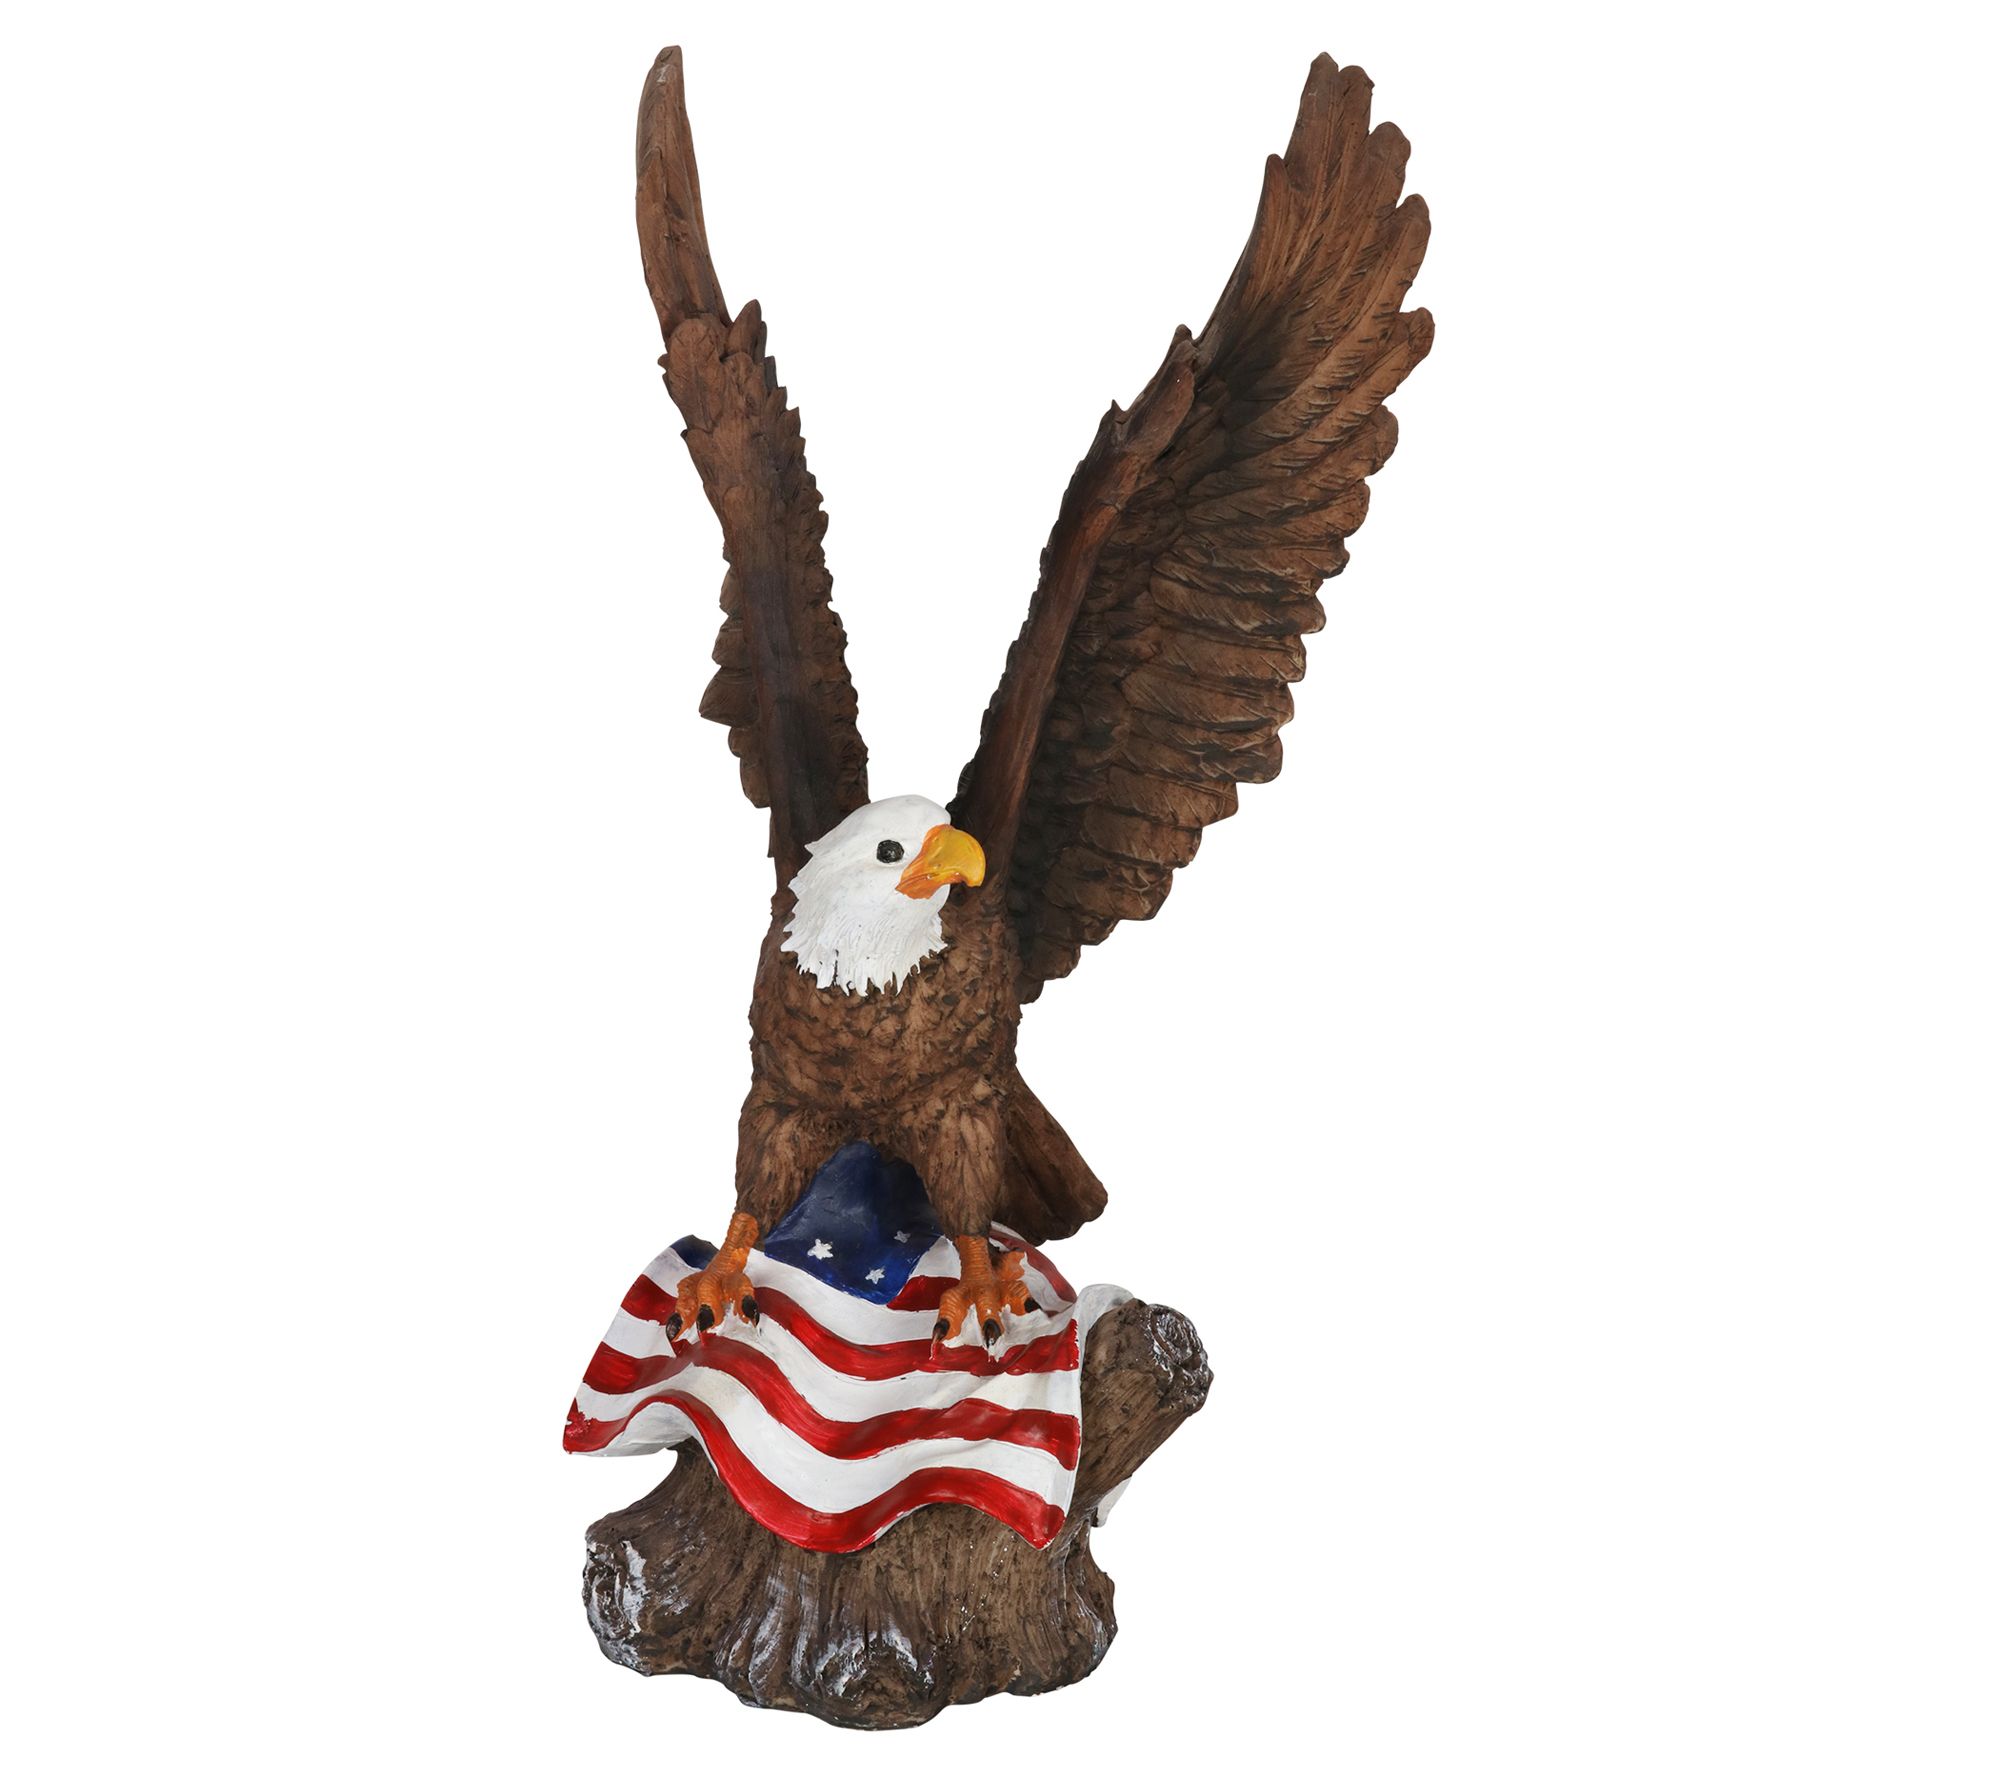 Prof. Yuille on X: Bald eagles are so huge they look like a guy in a  really good bald eagle costume.  / X